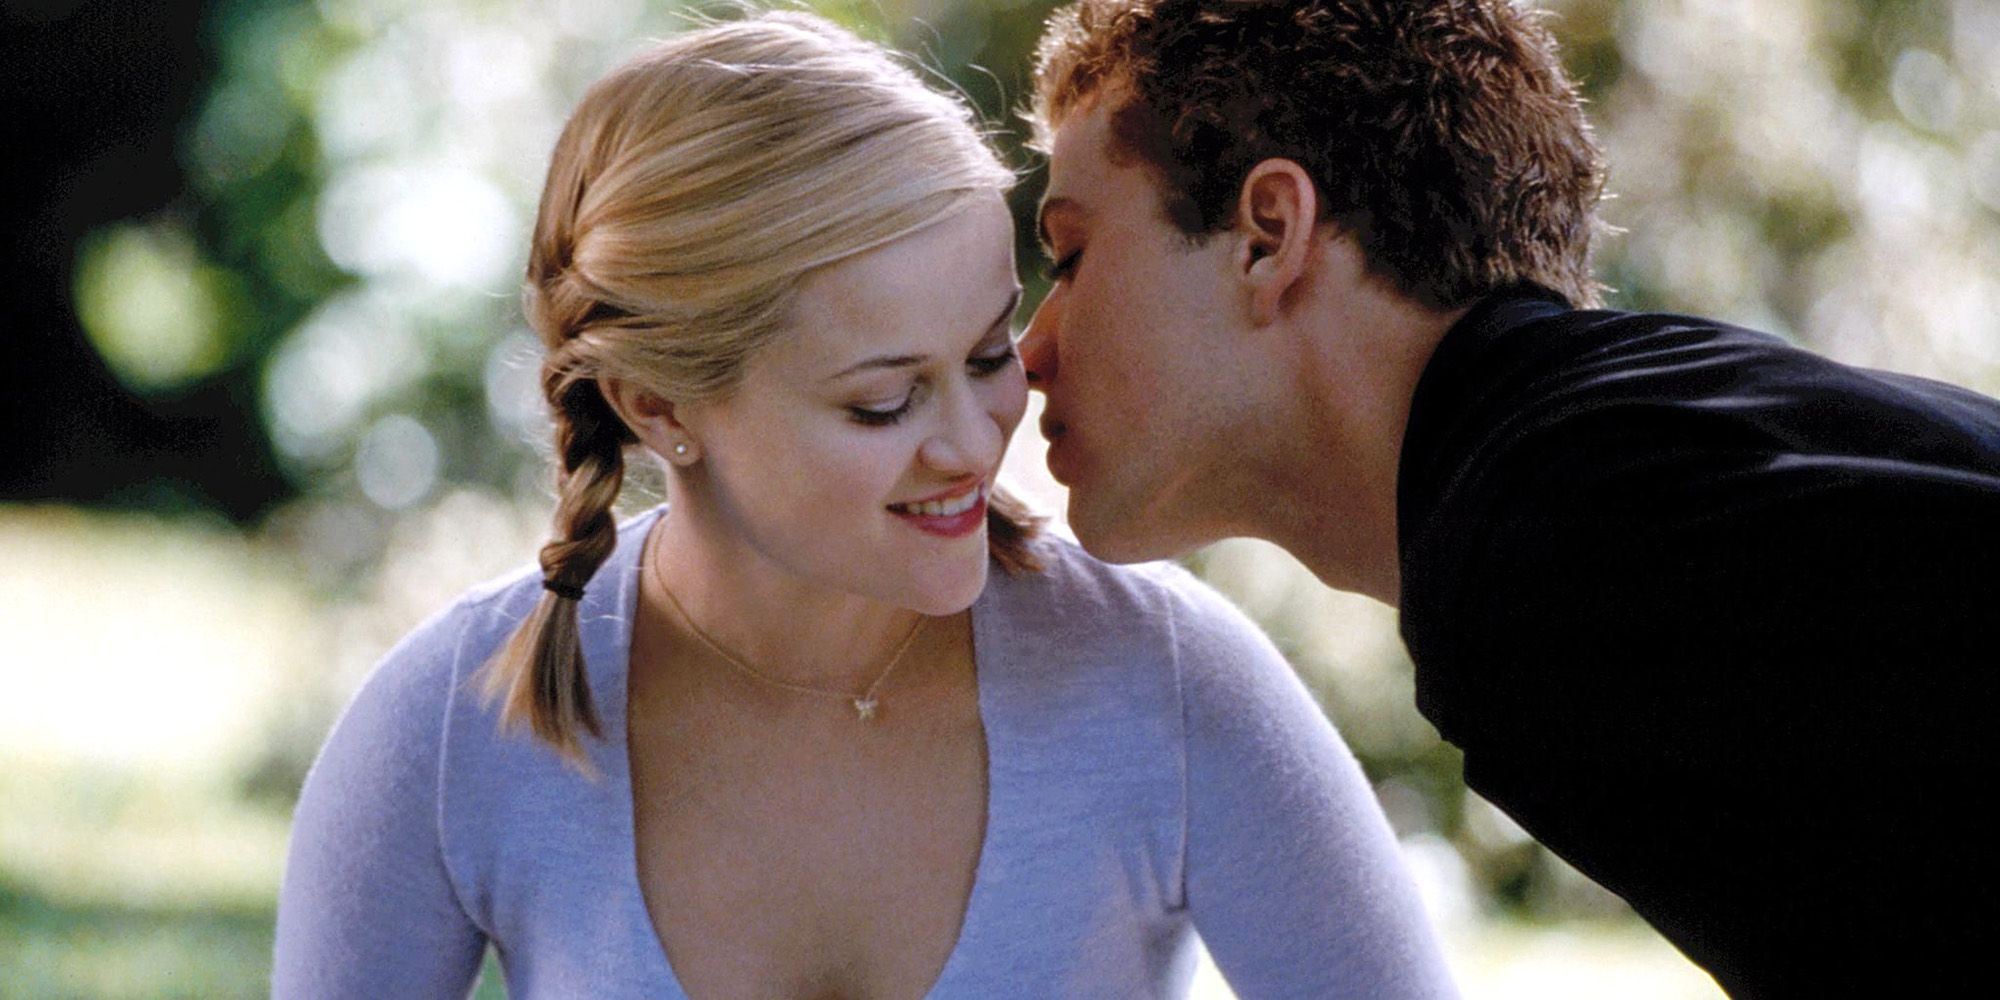 Cruel Intentions TV adaptation reportedly picked up by